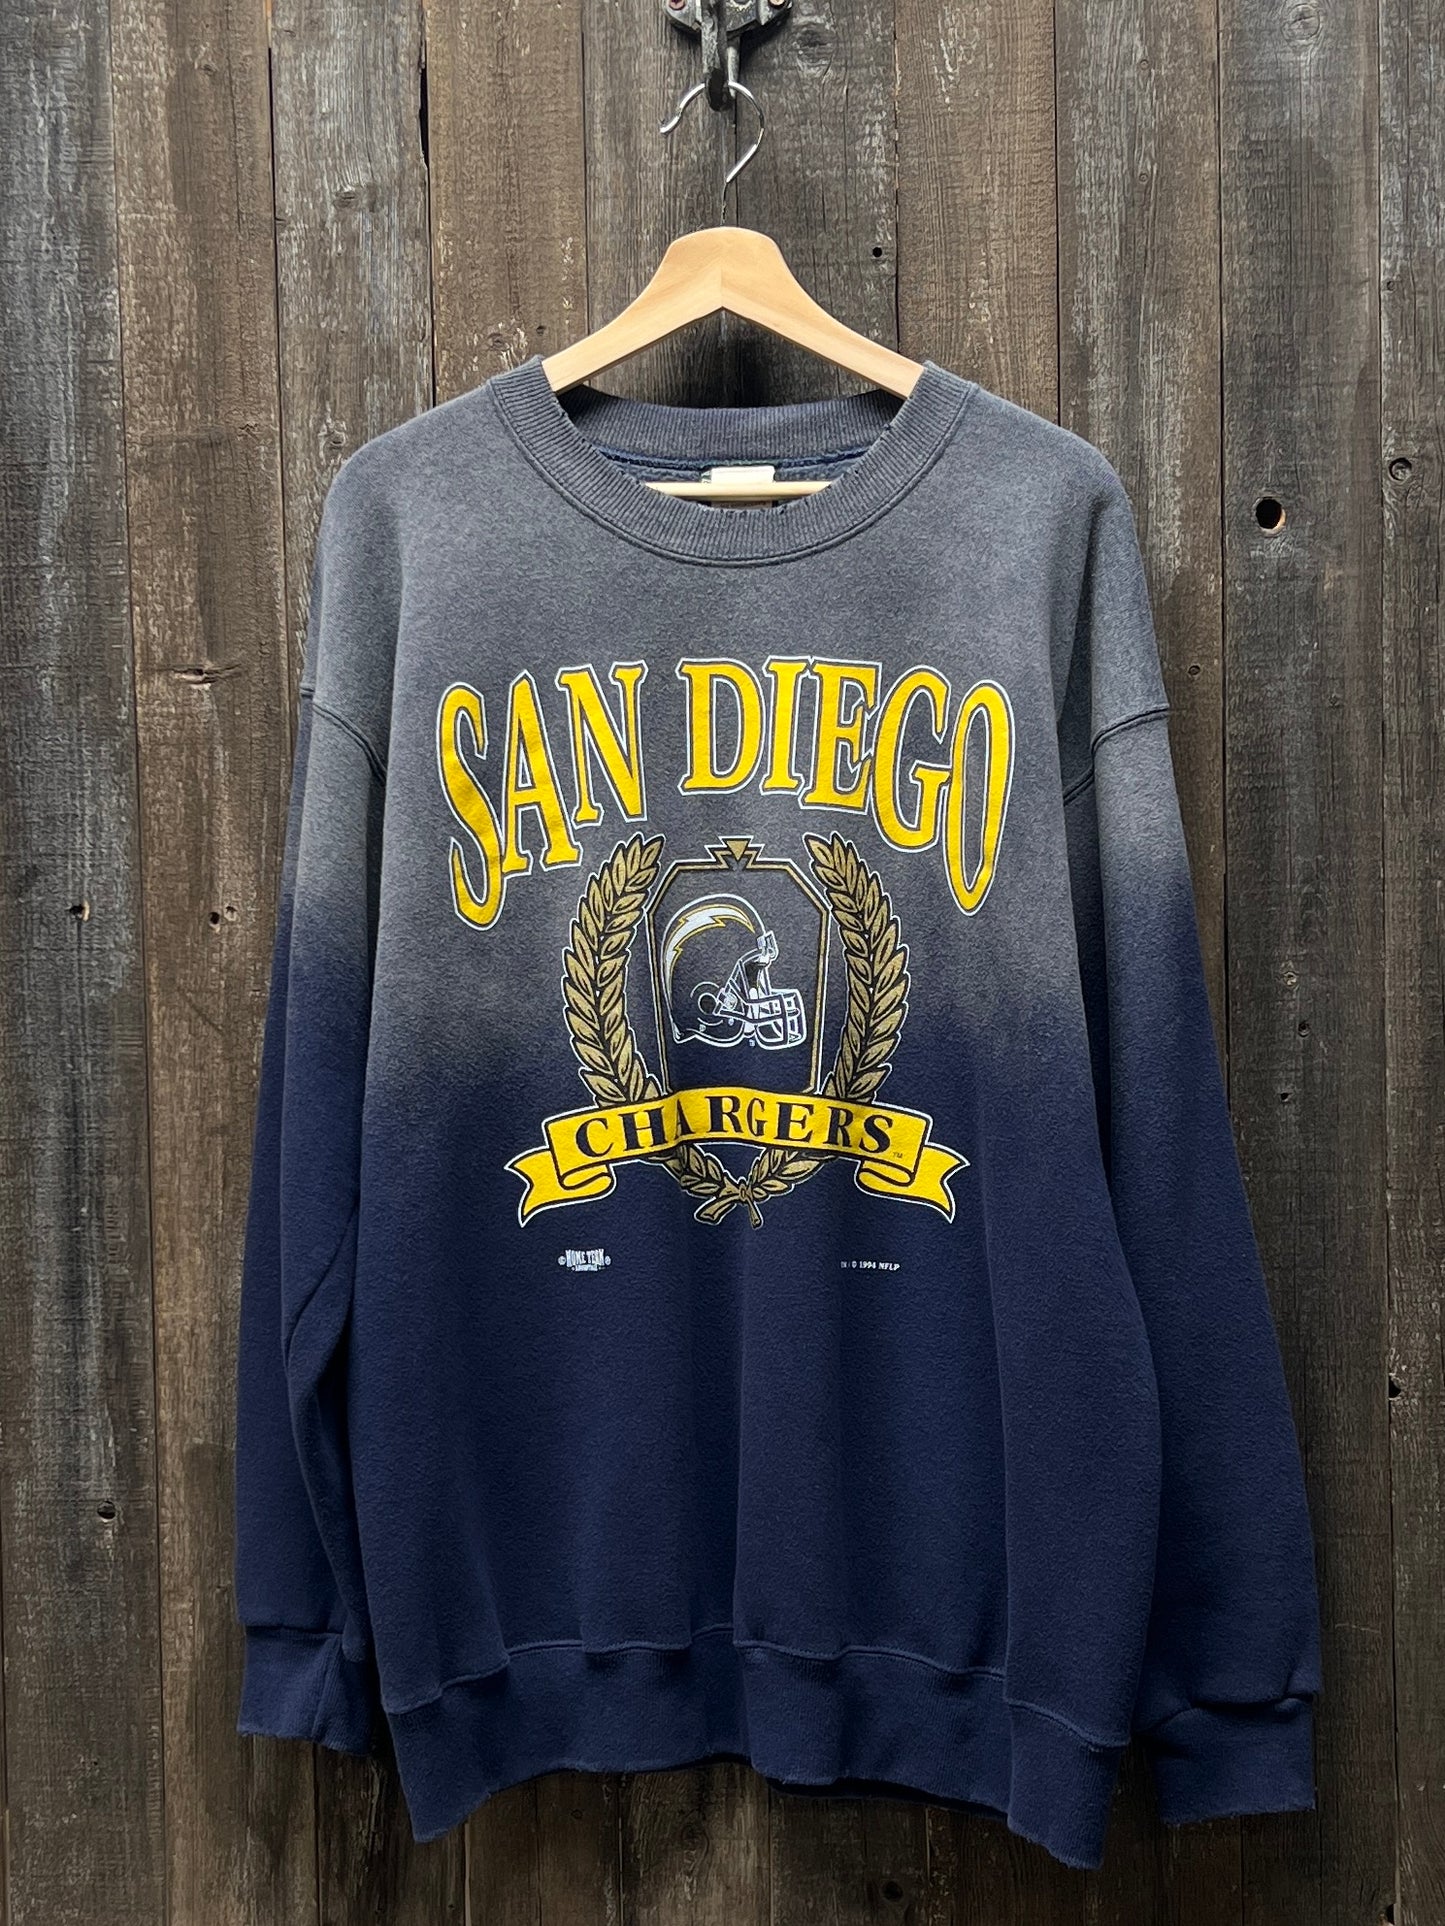 San Diego Chargers Sweatshirt -XL-Customize Your Embroidery Wording